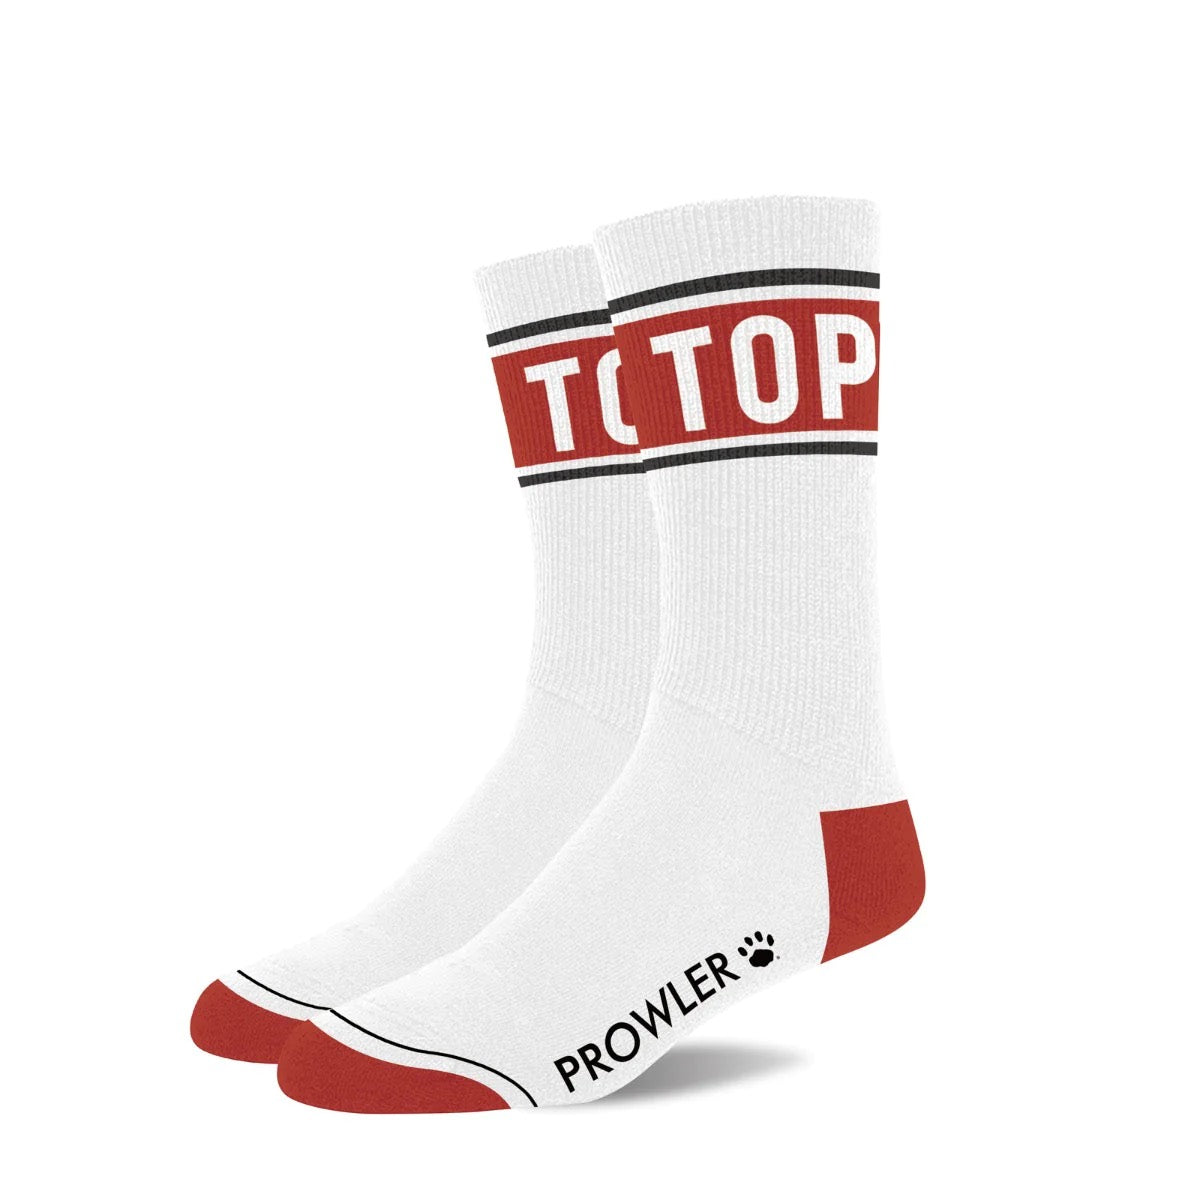 A pair of White & Red "Top" Prowler Text Socks.